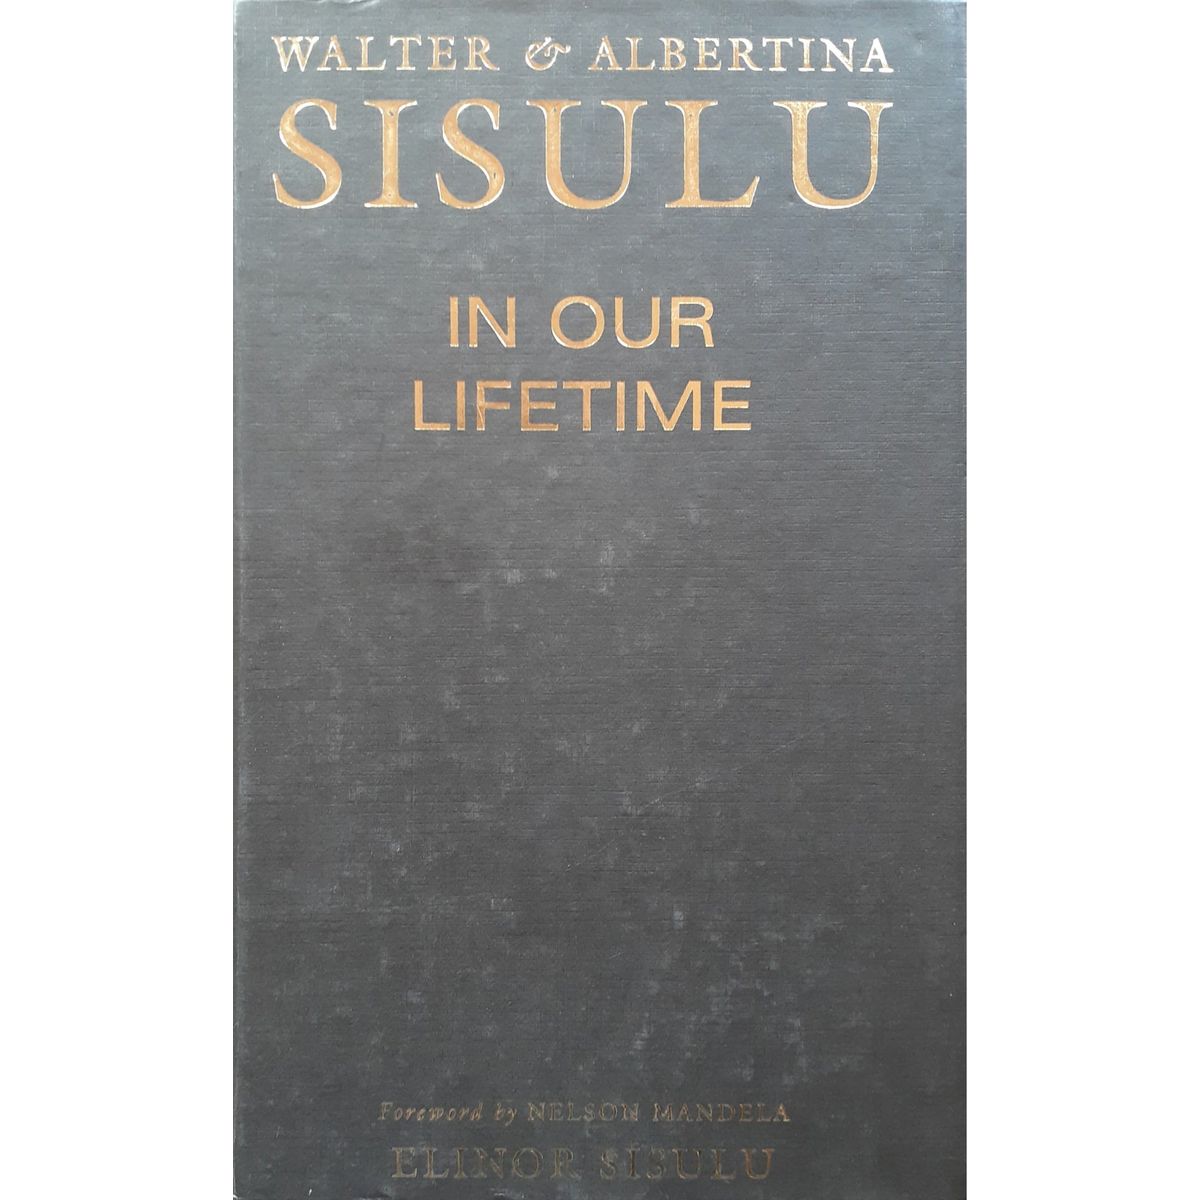 ISBN: 9780864863232 / 0864863233 - Walter and Albertina Sisulu: In Our Lifetime by Elinor Sisulu, Signed and inscribed by Author [2002]